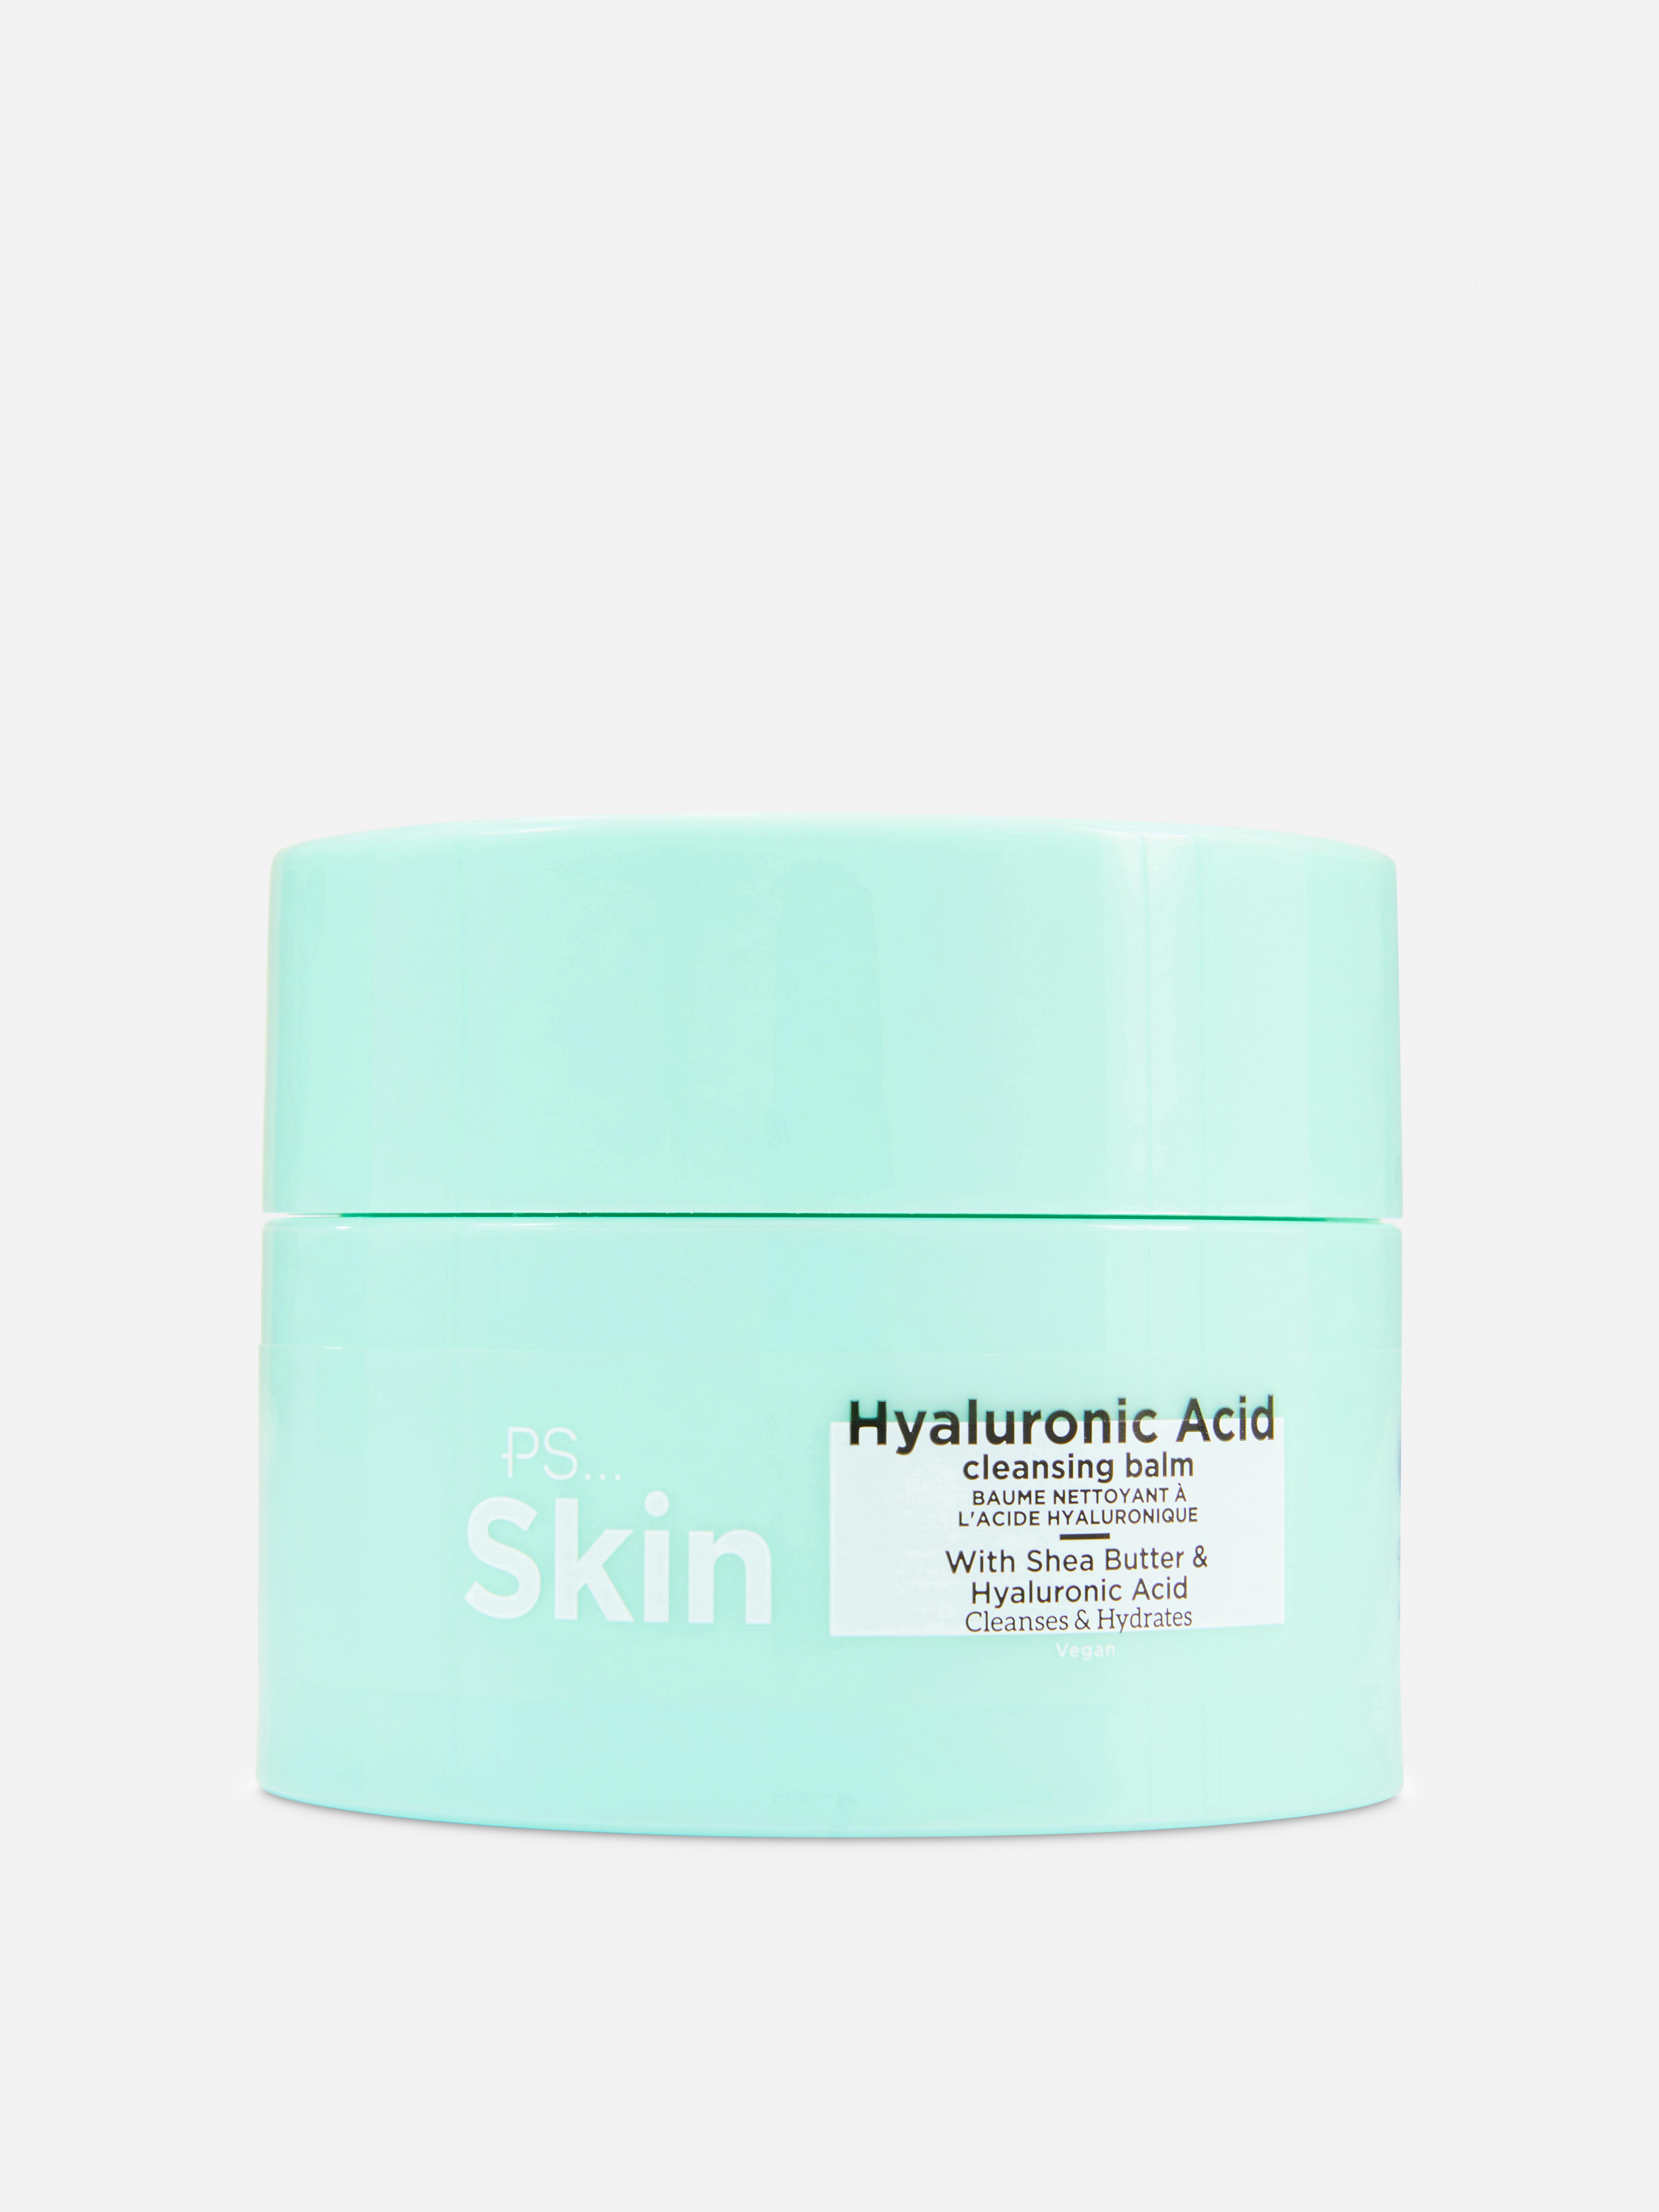 PS... Skin Hyaluronic Acid Cleansing Balm